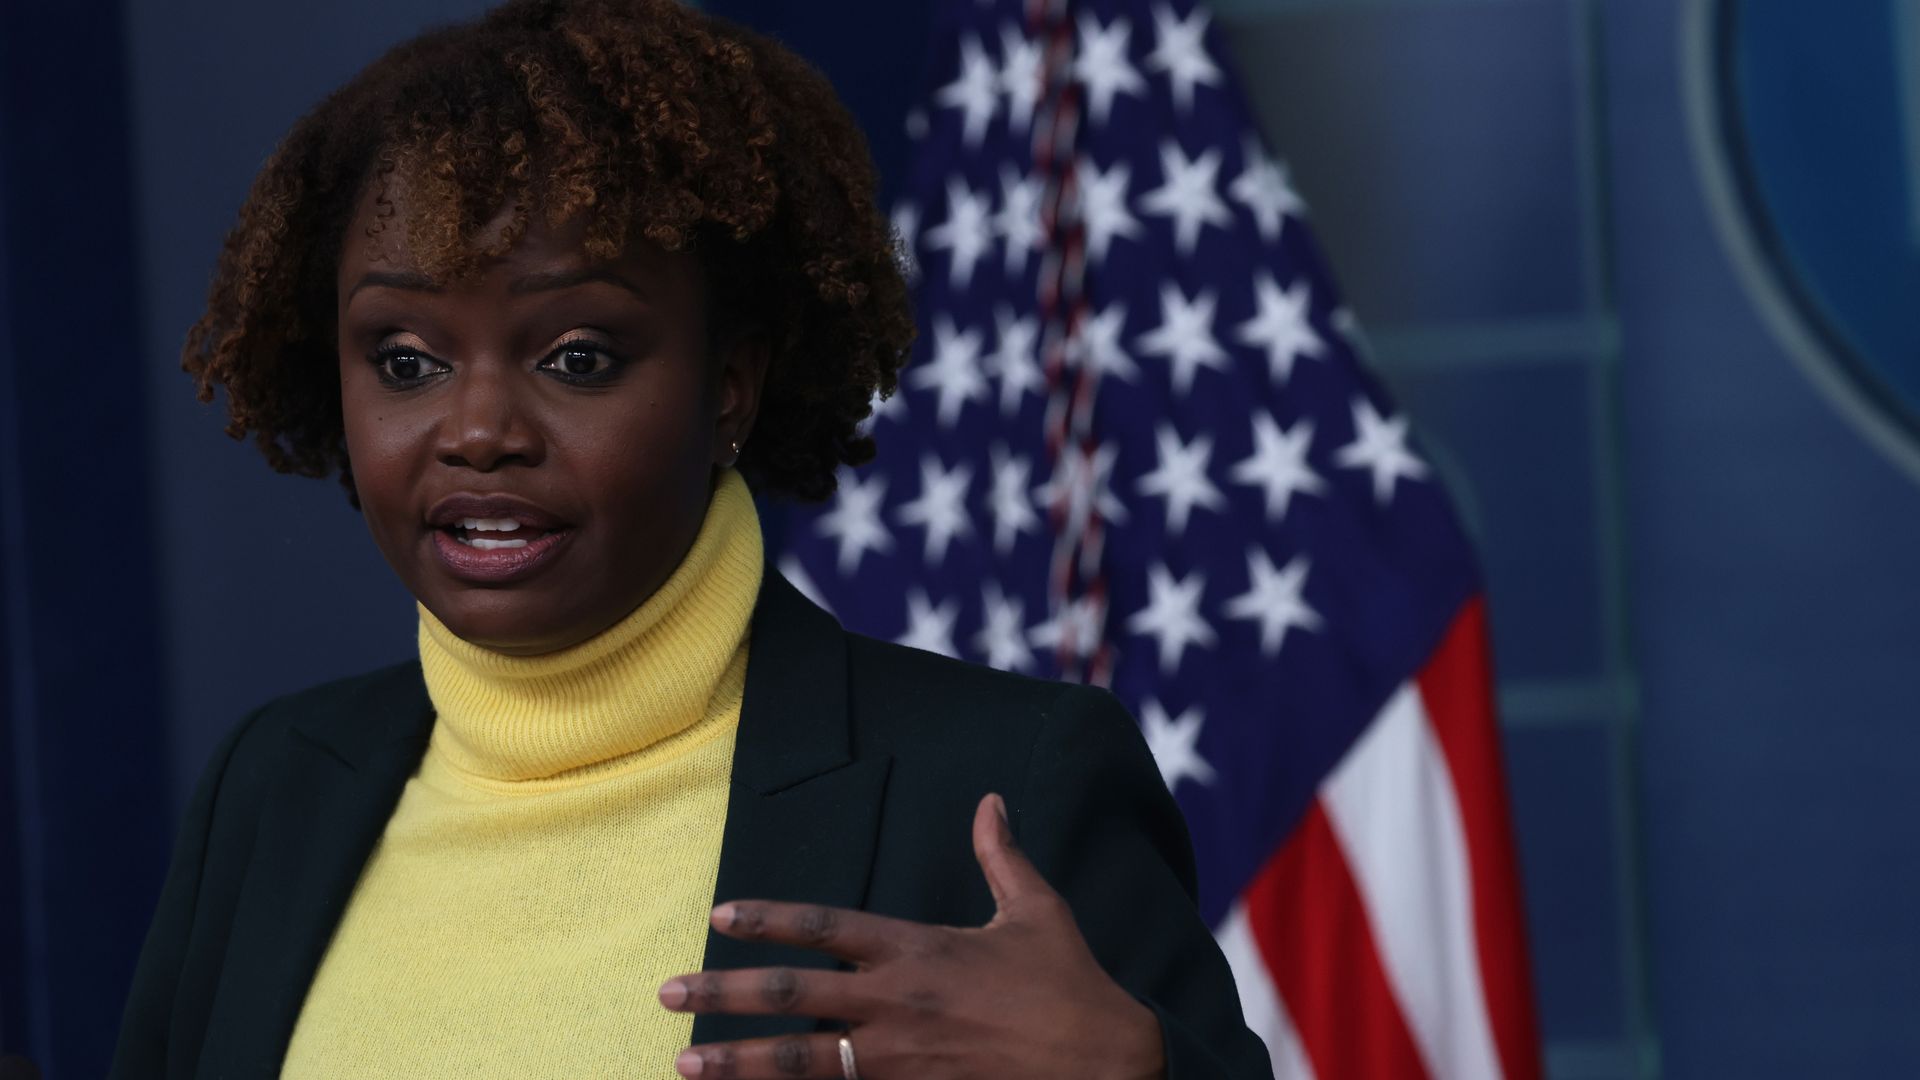 White House Principal Deputy Press Secretary Karine Jean-Pierre conducts a daily press briefing at the James S. Brady Press Briefing Room of the White House on February 14, 2022 in Washington, DC. 